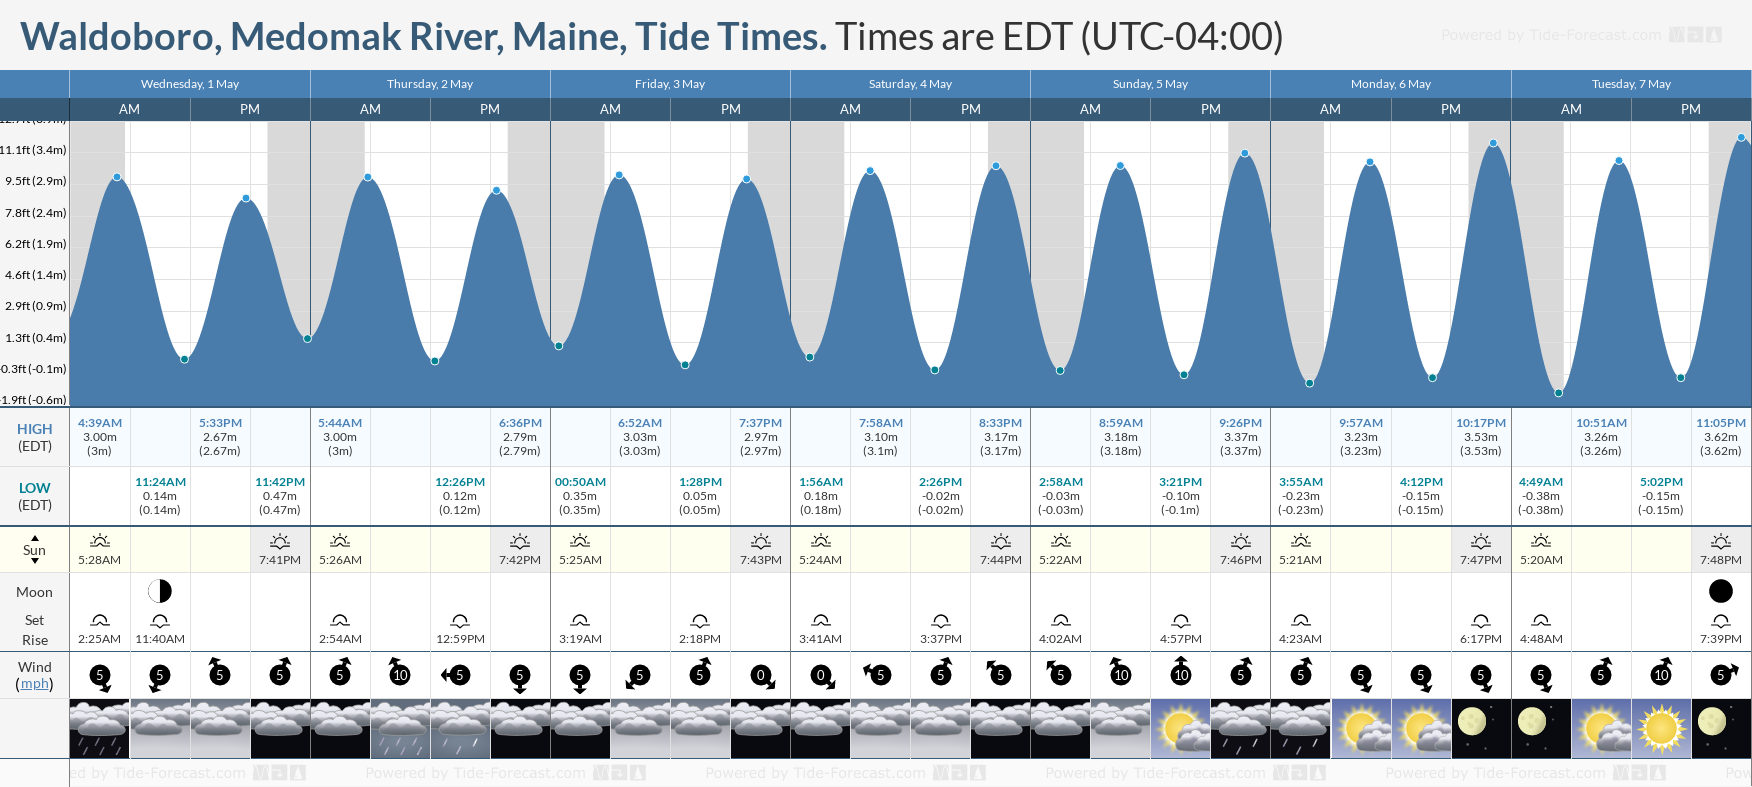 Waldoboro, Medomak River, Maine Tide Chart including high and low tide tide times for the next 7 days